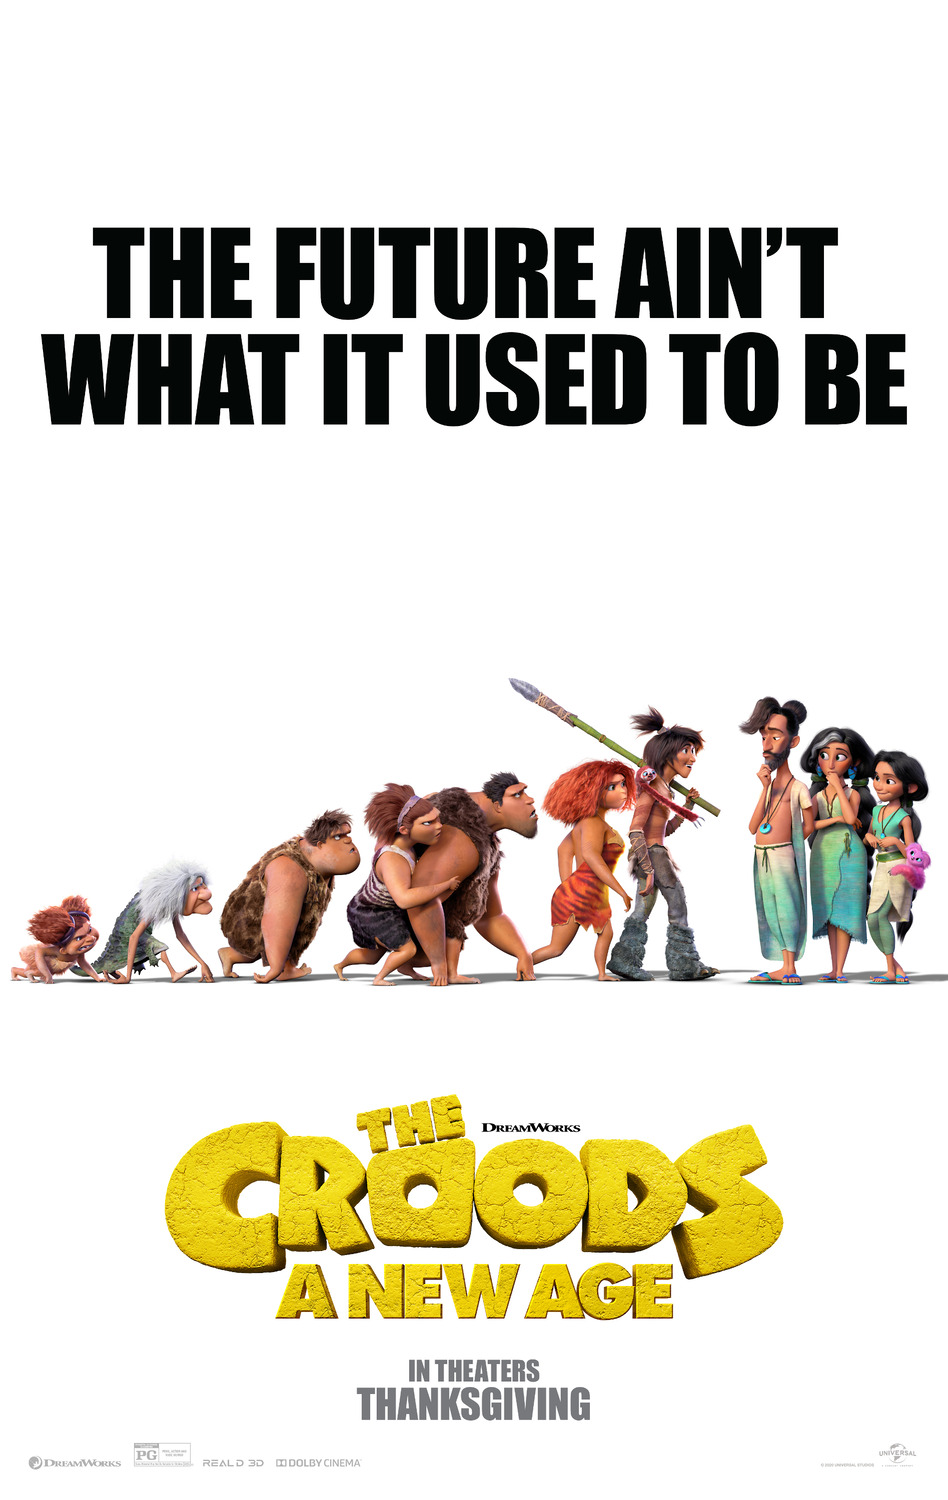 The Croods: A New Age | Poster Concept Design